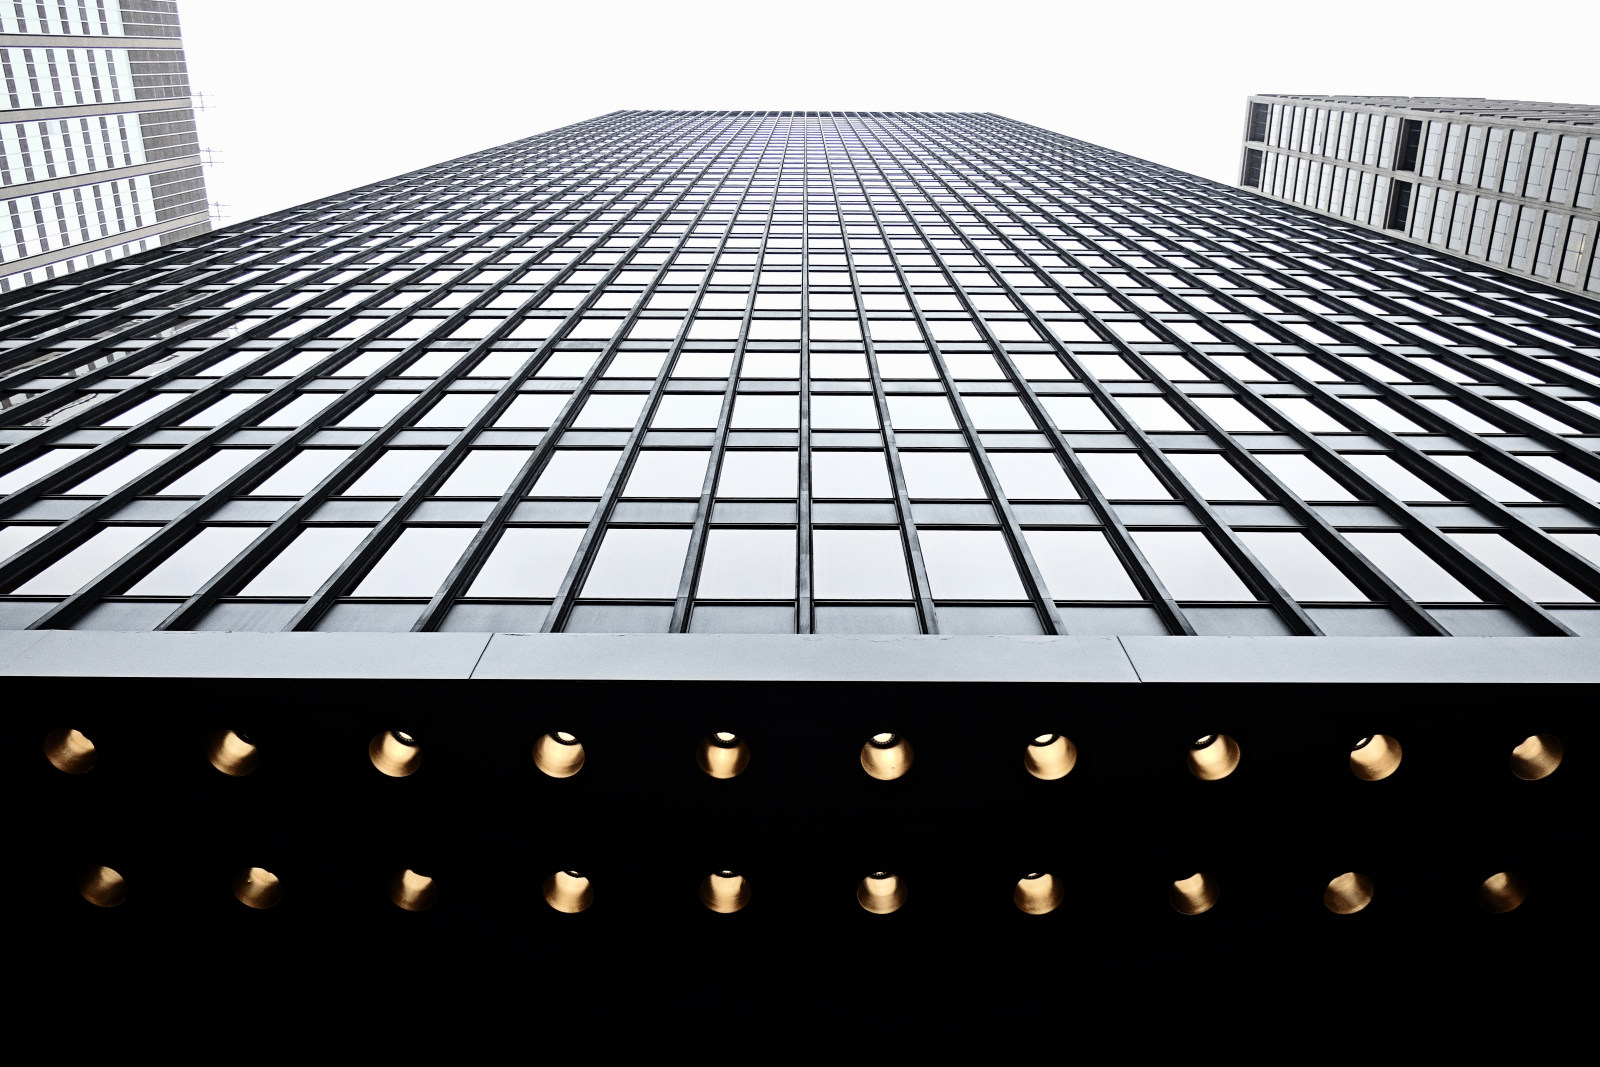 The iconic Segram building, by architect Ludwig Mies van der Rohe in Midtown Manhattan, New York City. 